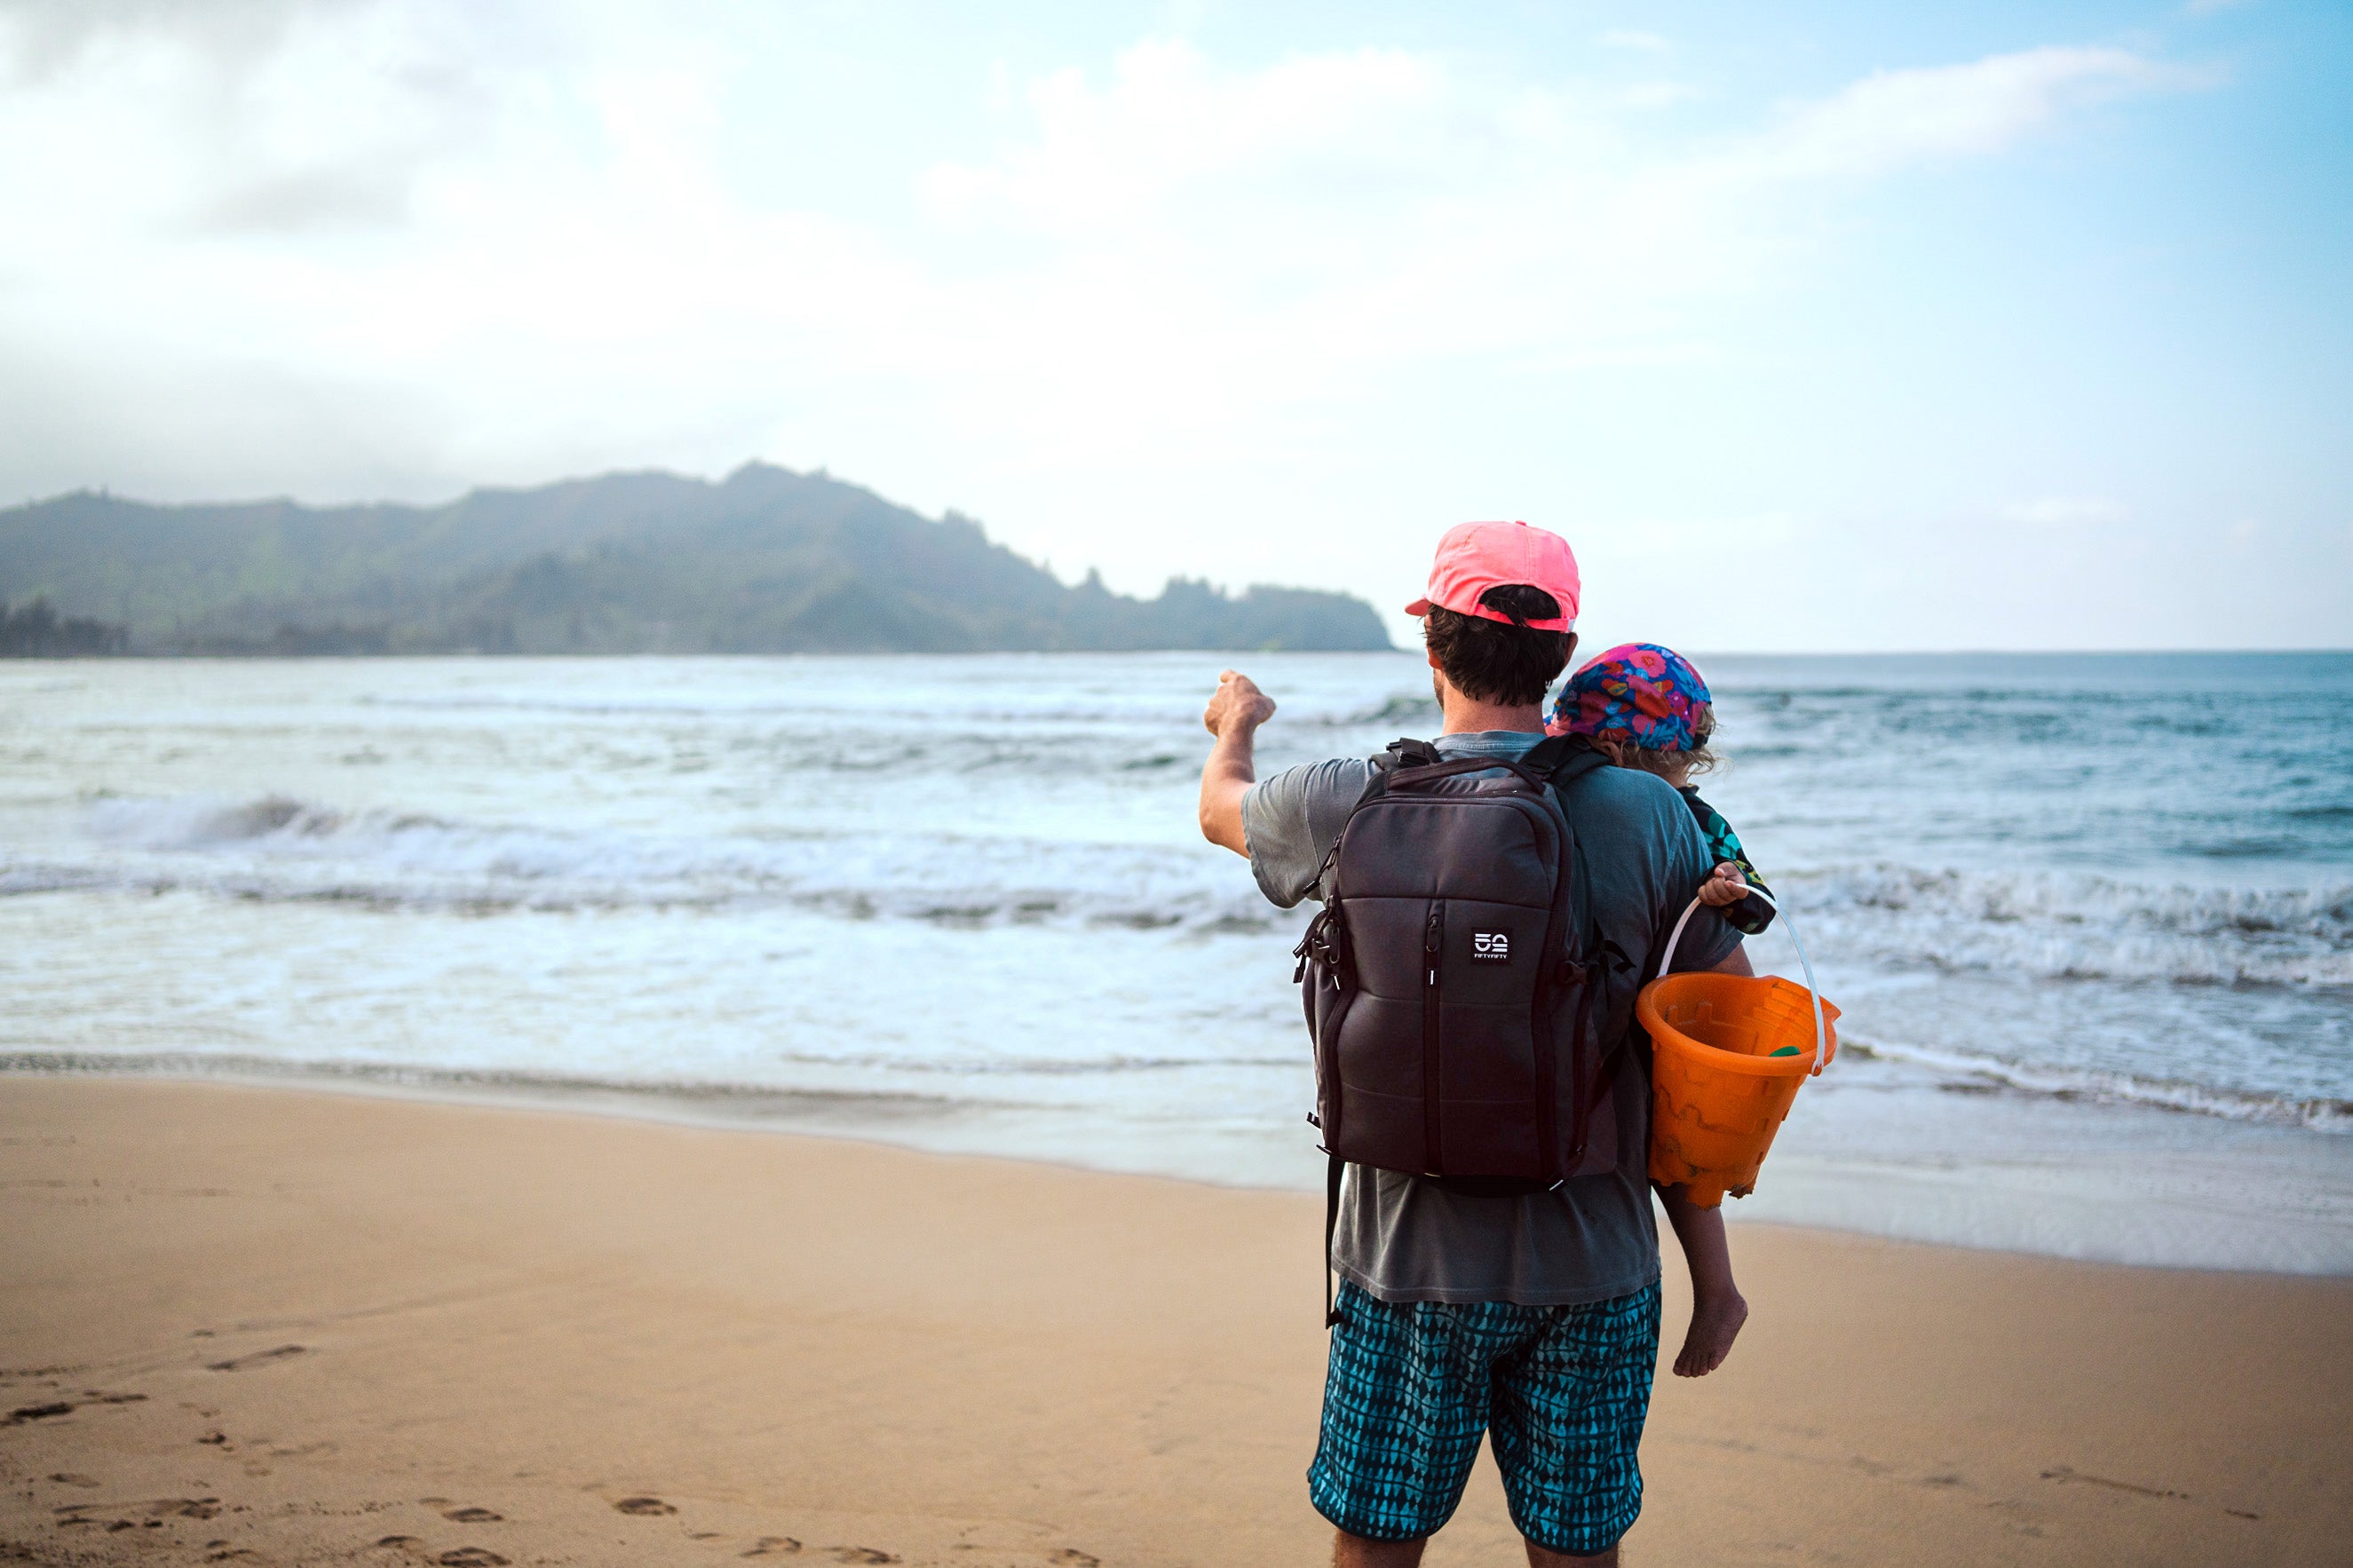 FiftyFiftyGear-best-diaper-backpack-for-dads-edc-travel-bag-parenting-gear-beach-holiday